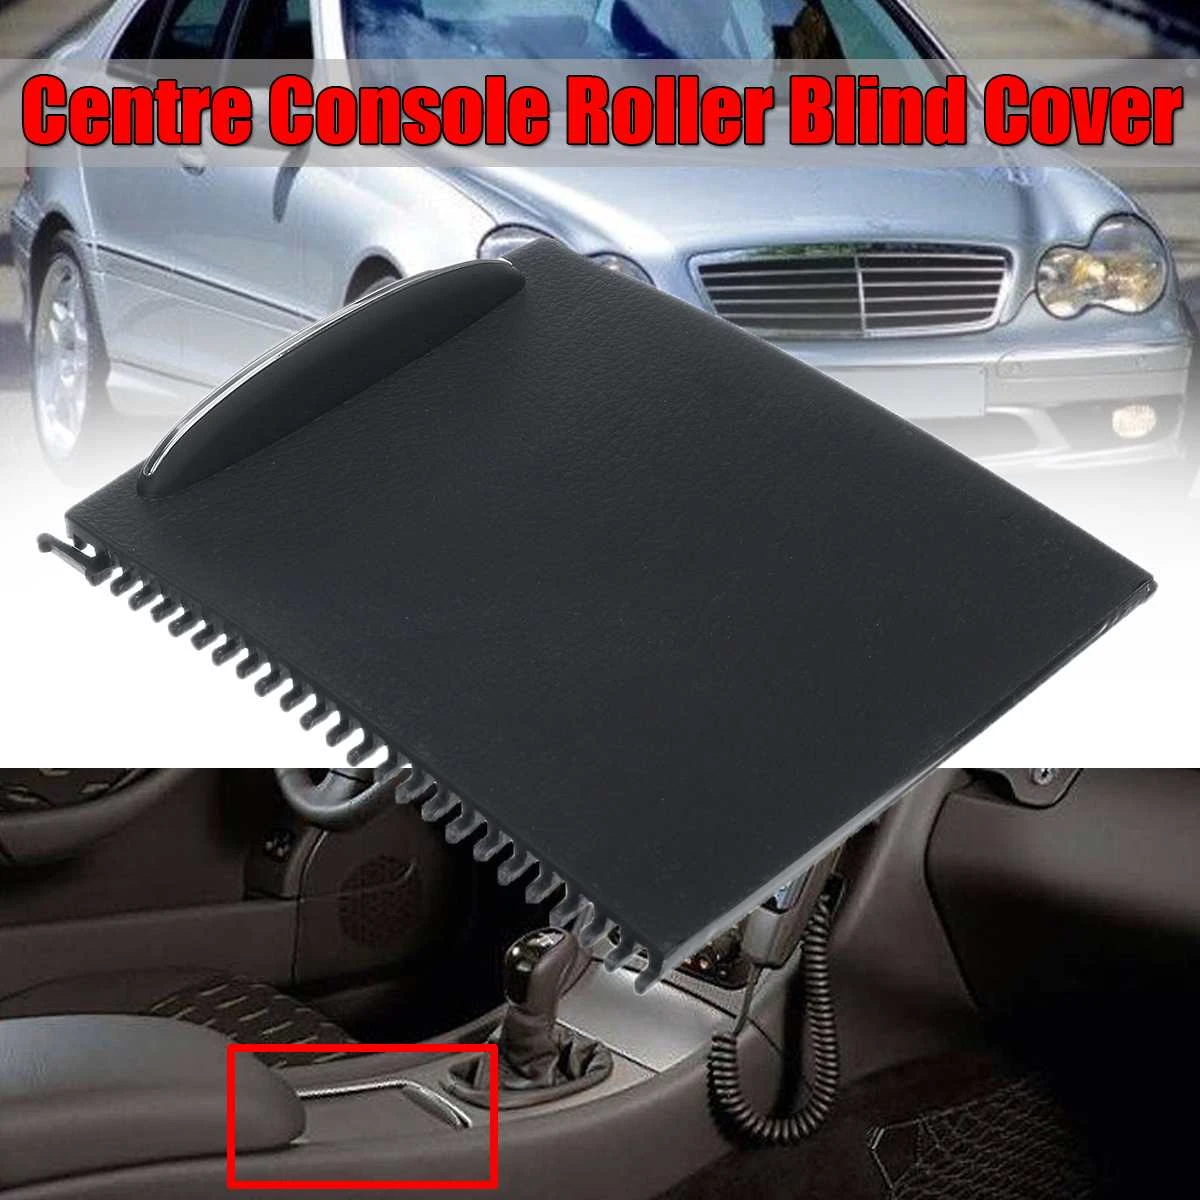 New Car Inner Centre Console Slide Roller Blind Cover For Mercedes For Benz C-Class W203 2000-2007 Car Water Cup Holder Storage